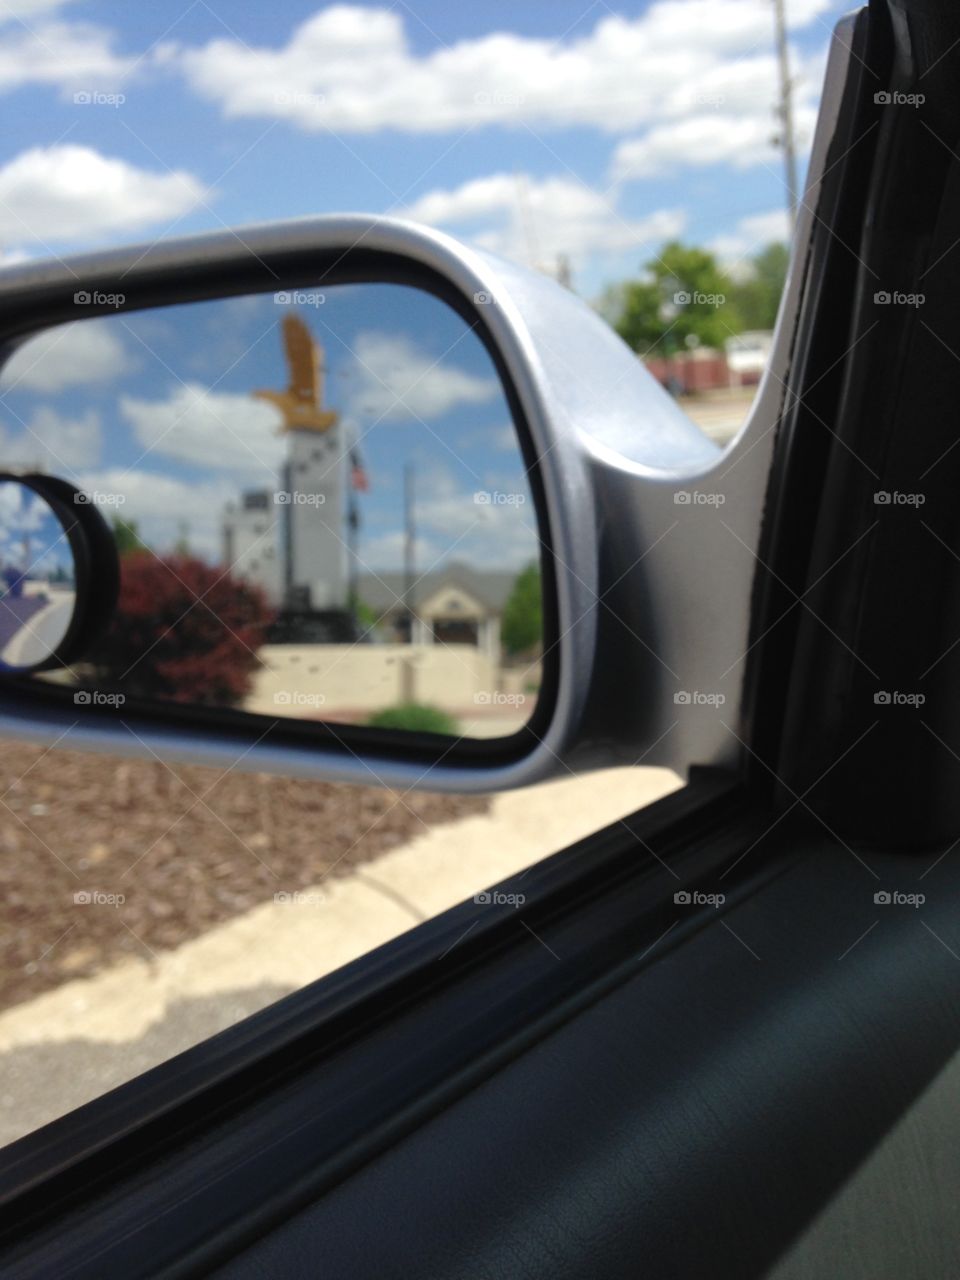 Downtown Fishers in the side mirror